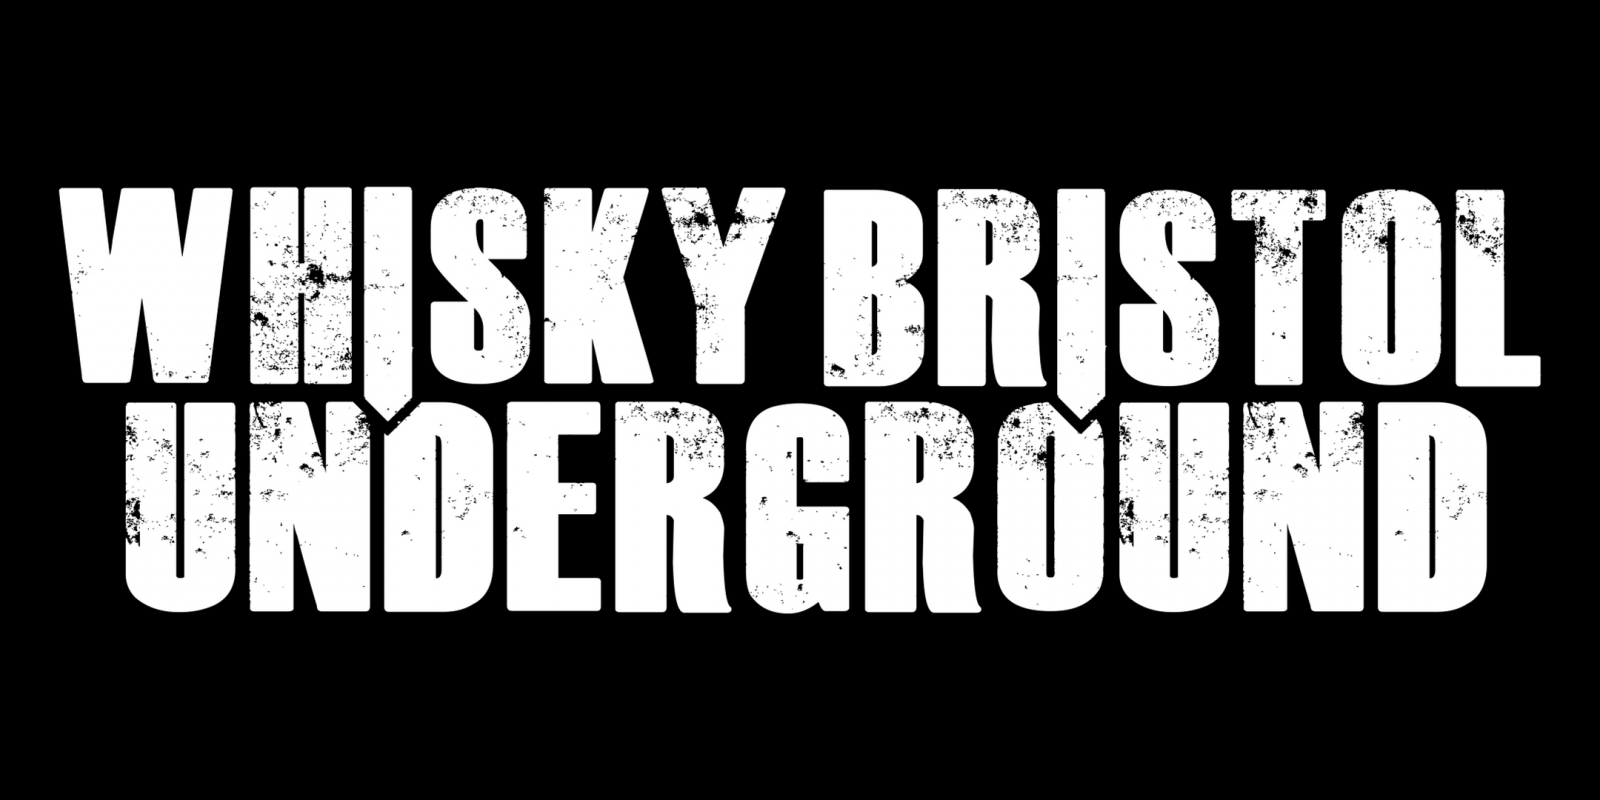 Whisky Bristol Underground will take place from 12pm-5pm on Saturday 8th September 2018.